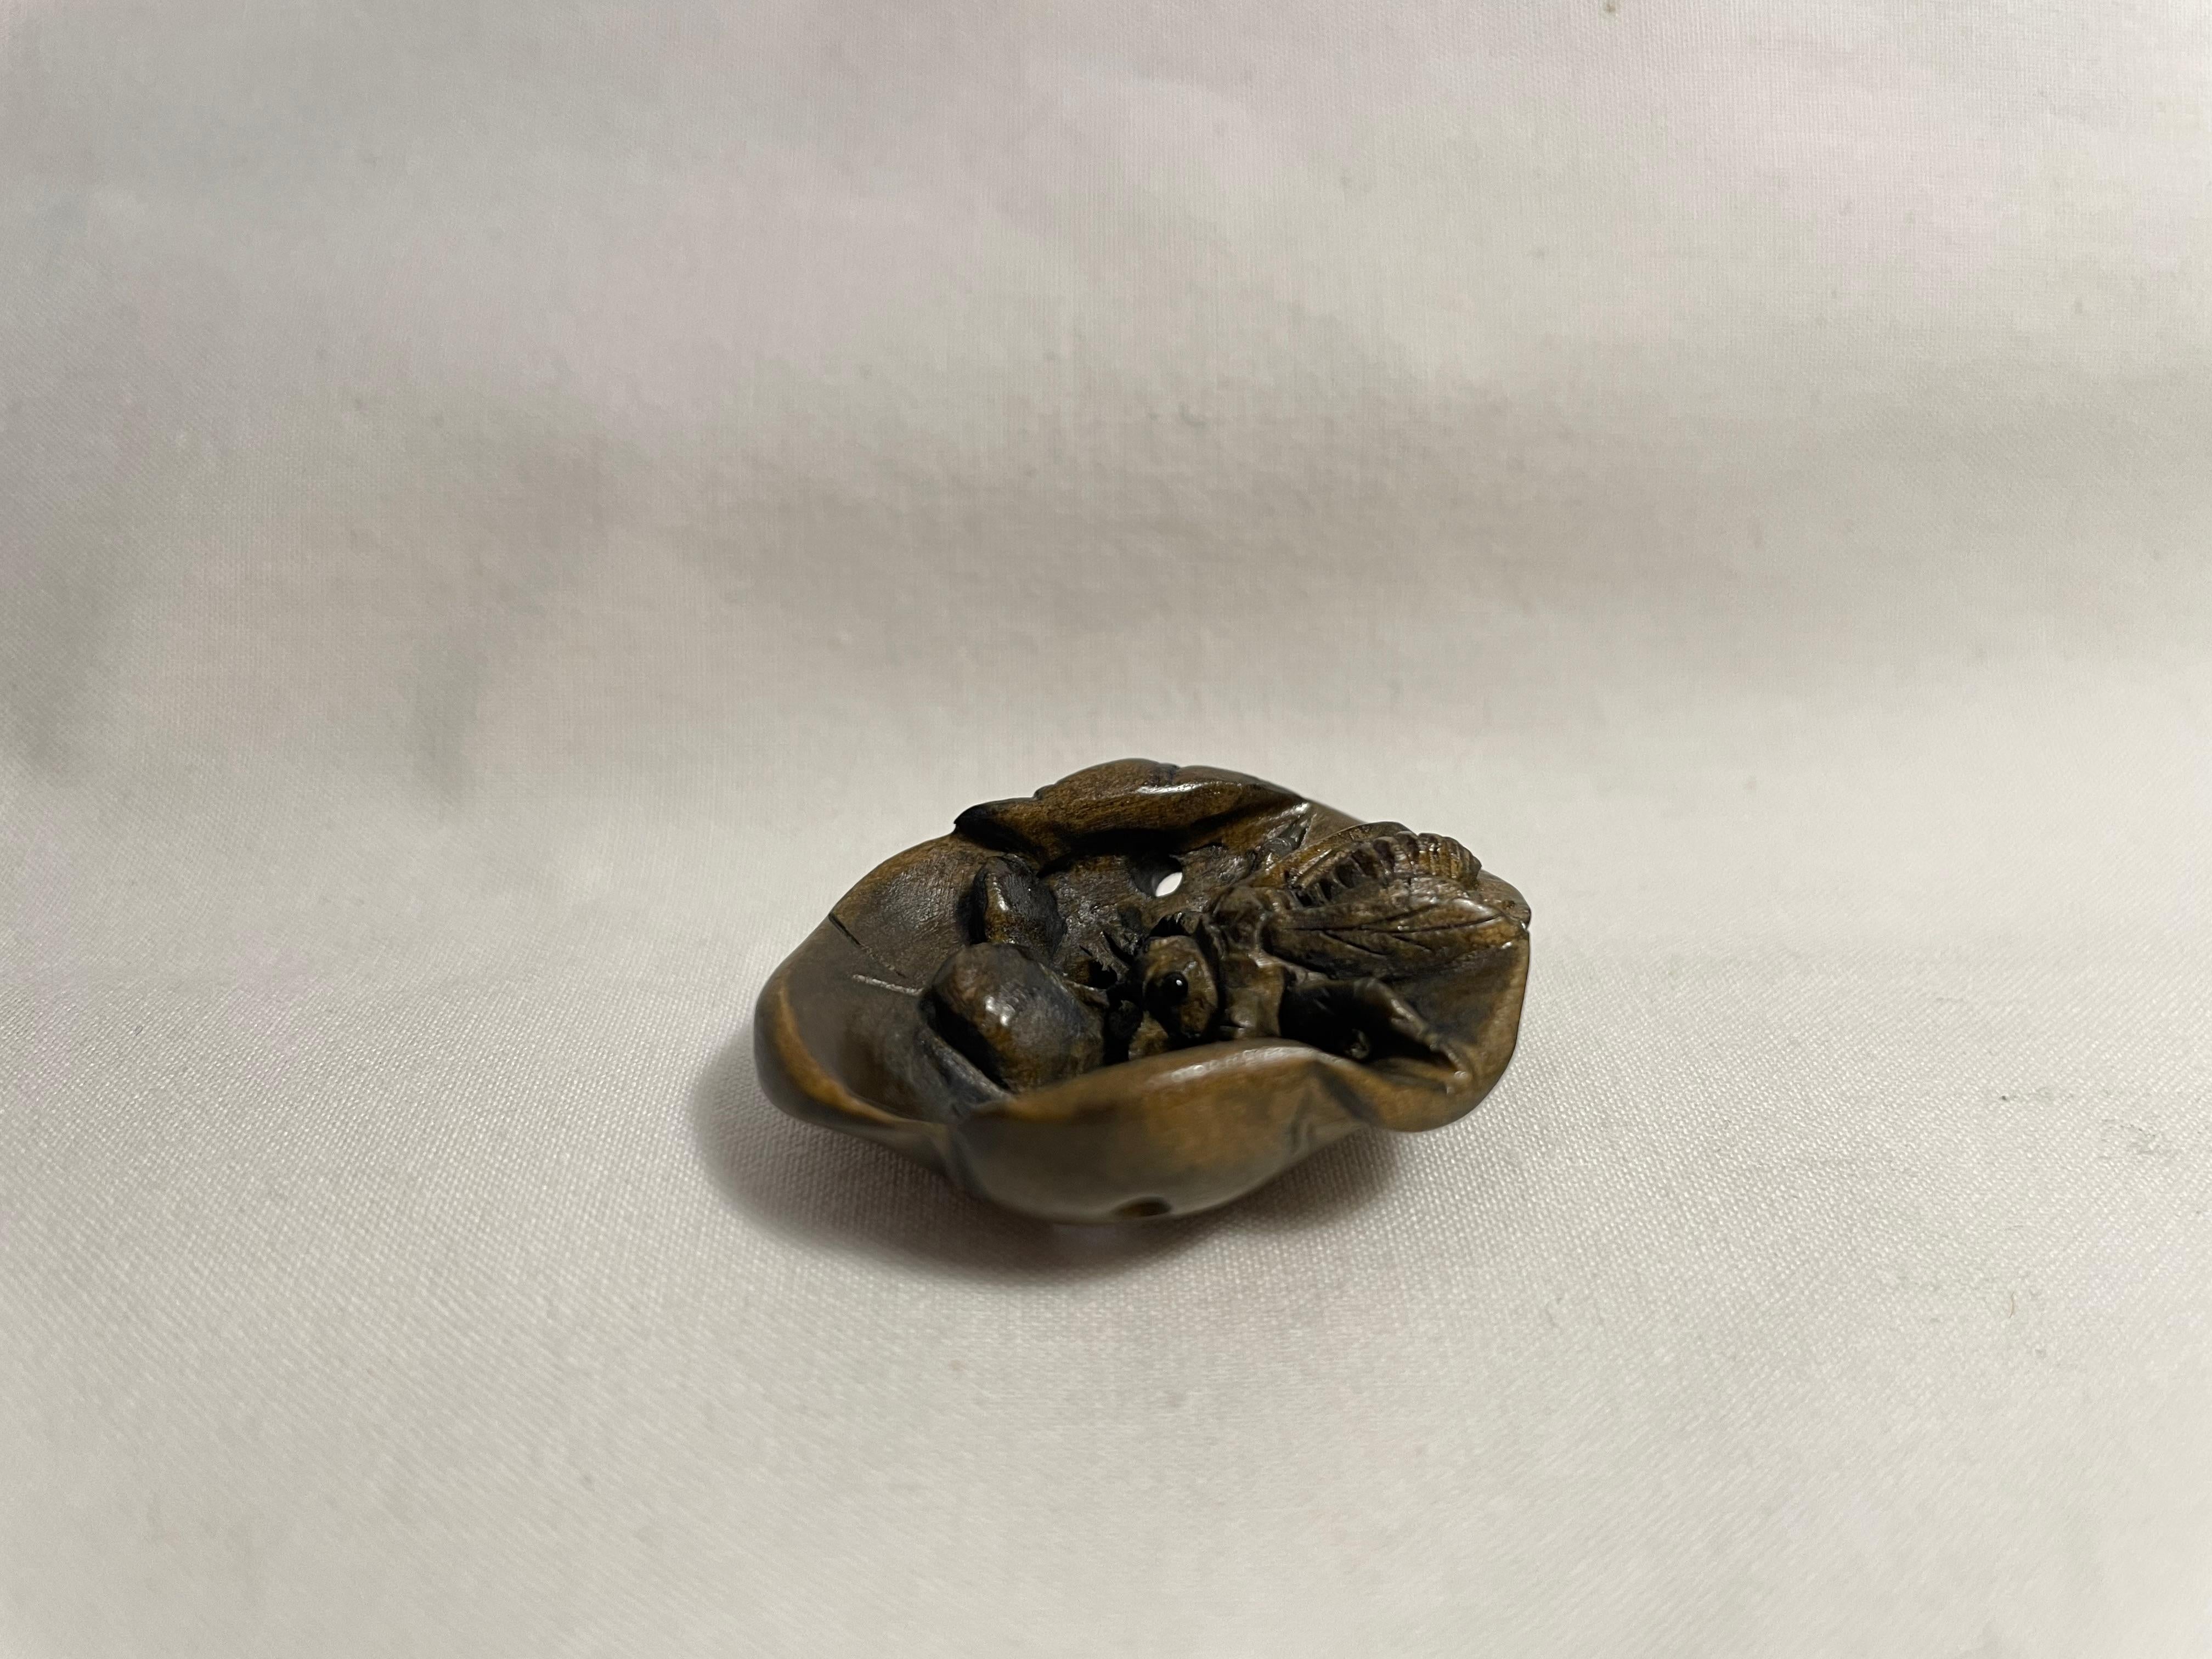 This is an antique netsuke made in Japan around Showa period 1960s.

Netsuke is a miniature sculpture, originating in 17th century Japan.
Initially a simply-carved button fastener on the cords of an inro box, netsuke later developed into ornately